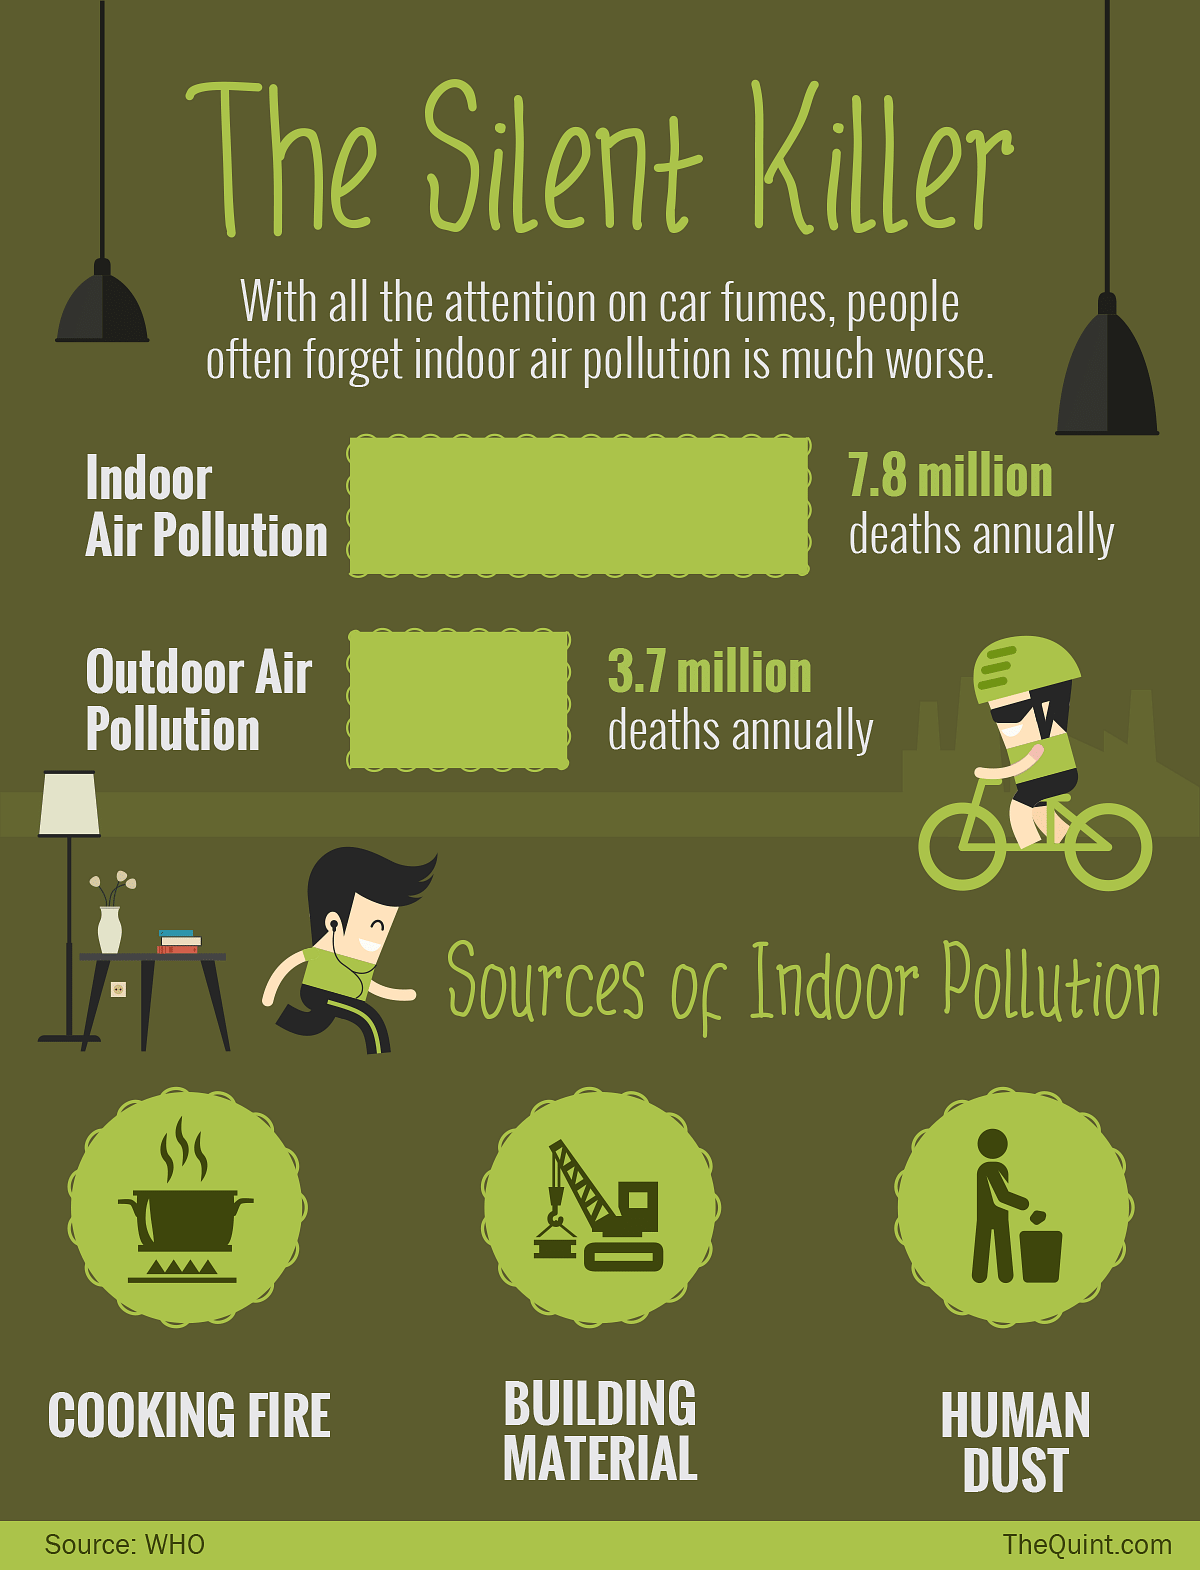 Indoor air pollution is a much bigger killer than outdoor air pollution, which politicians in Delhi have focused on.